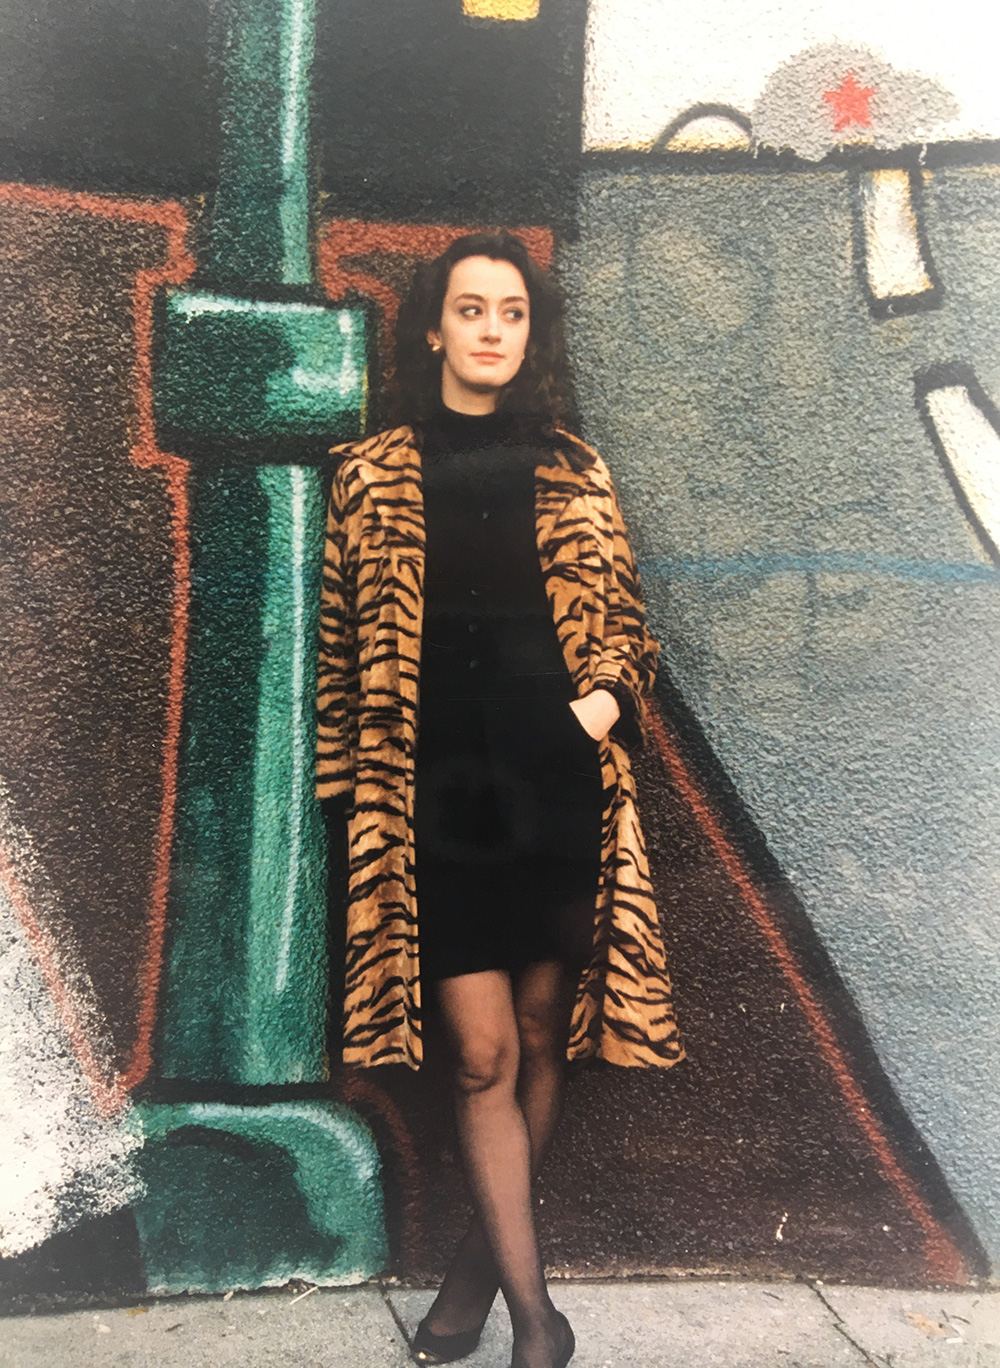 Dorothy Woodend stands against a graffiti wall in a short black dress, long tiger-print jacket, black tights and black shoes. She has long dark hair and is looking to the right.